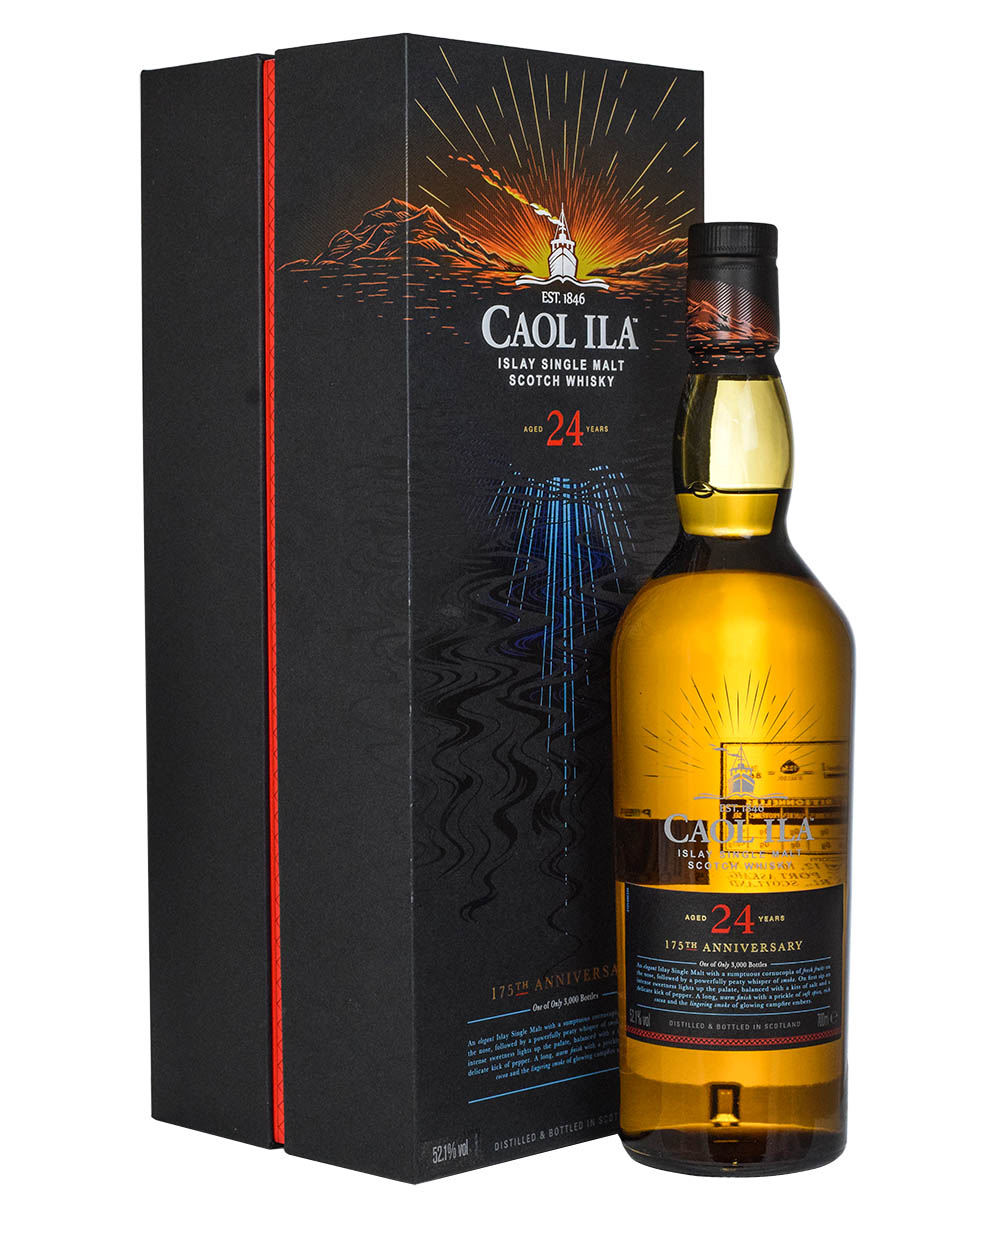 Caol Ila 24 Years Old 175th Anniversary Box Must Have Malts MHM